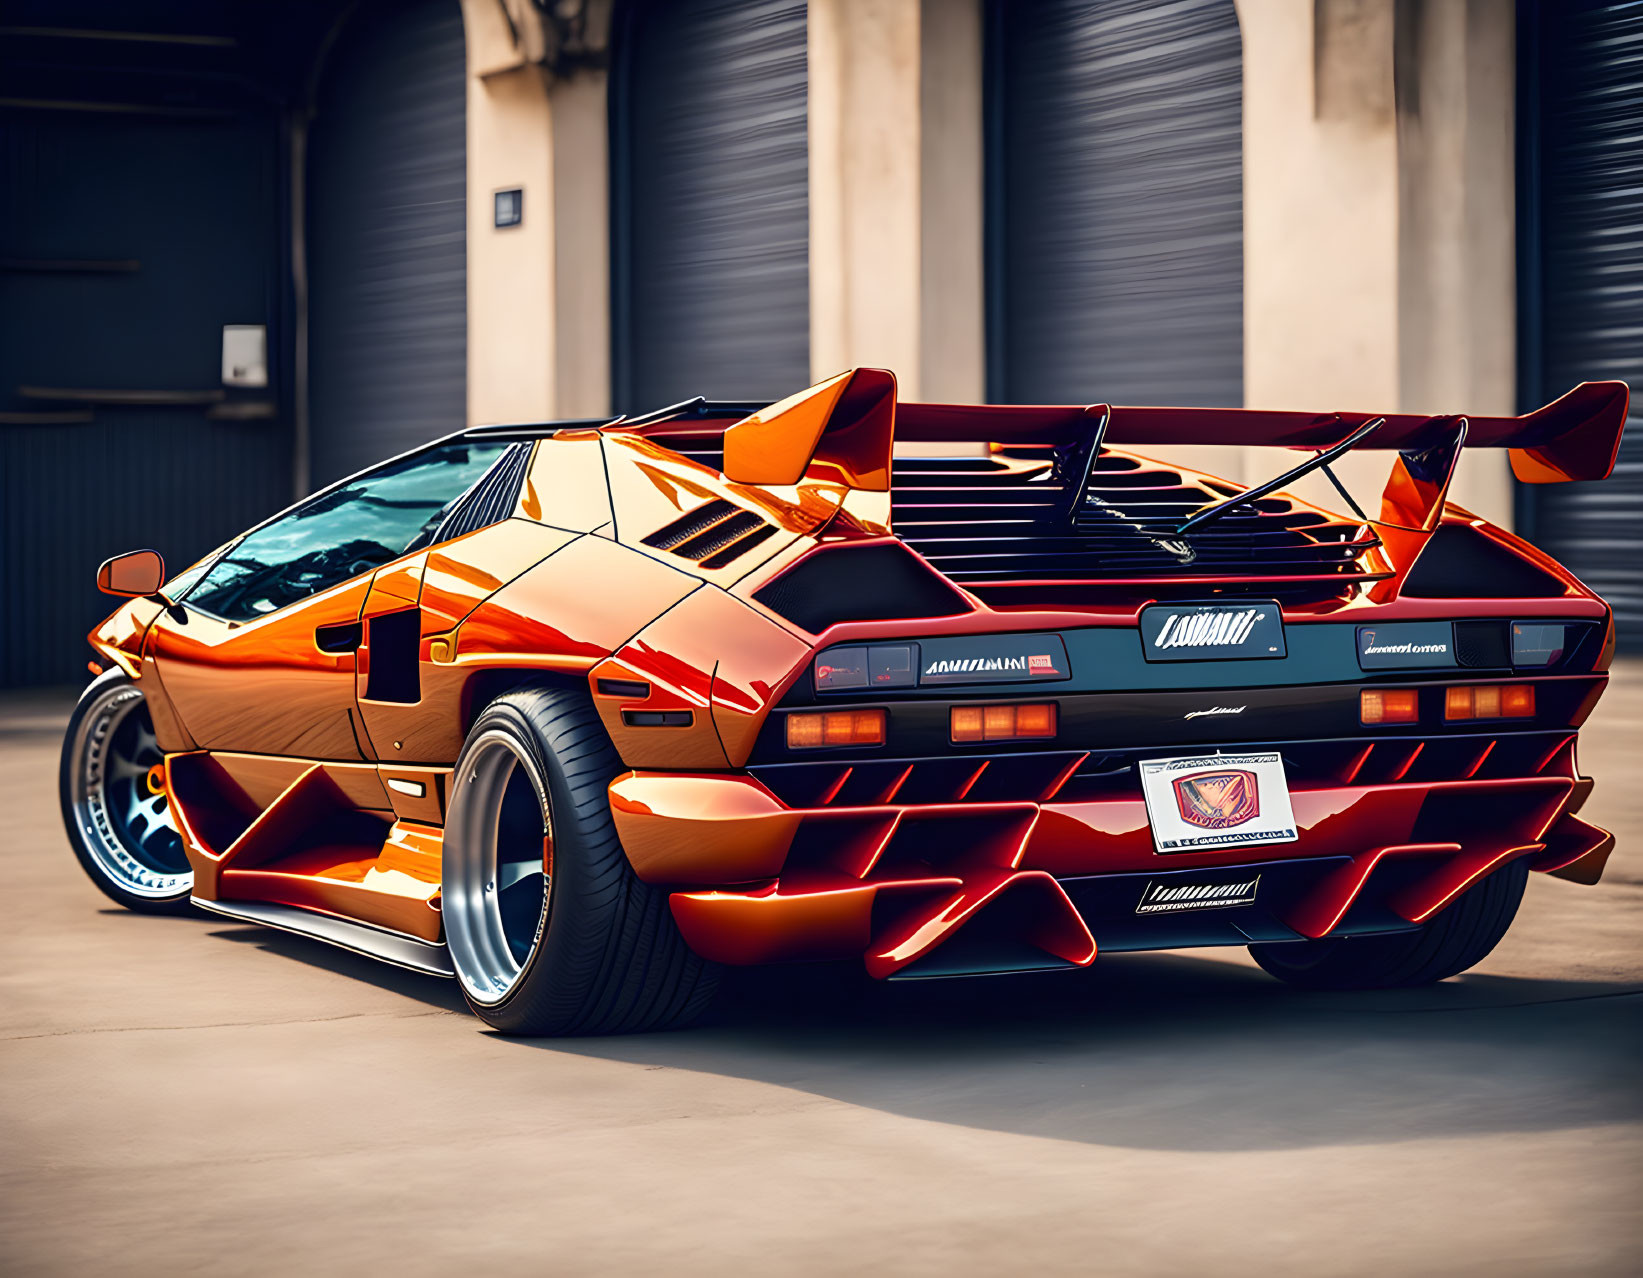 Orange Lamborghini Countach with Blue-Accented Wheels in Industrial Setting